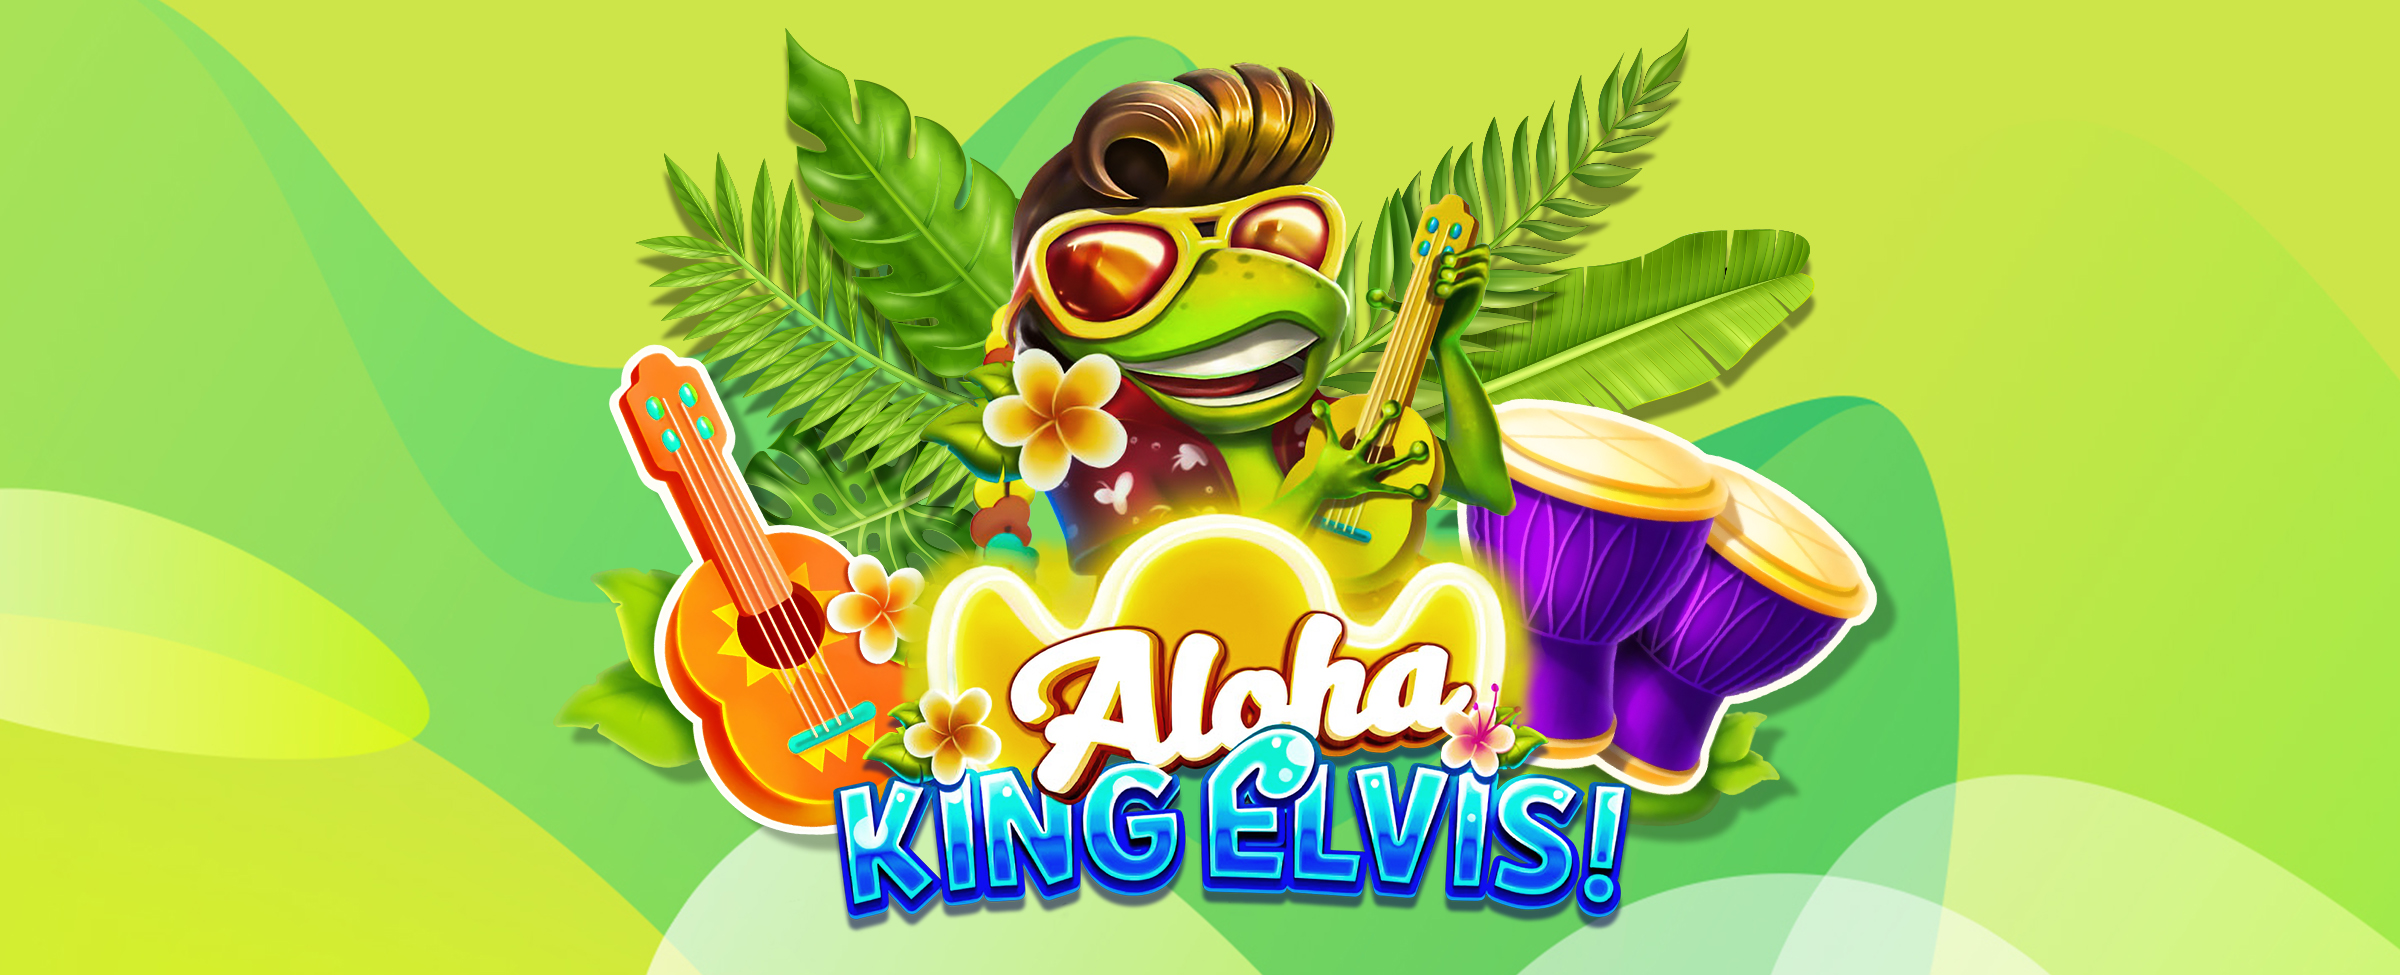 Standing in front of a palm tree is a cartoon frog dressed as an Elvis impersonator. In front are the words ‘Aloha King Elvis!’ - the logo from the SlotsLV slots game of the same name.